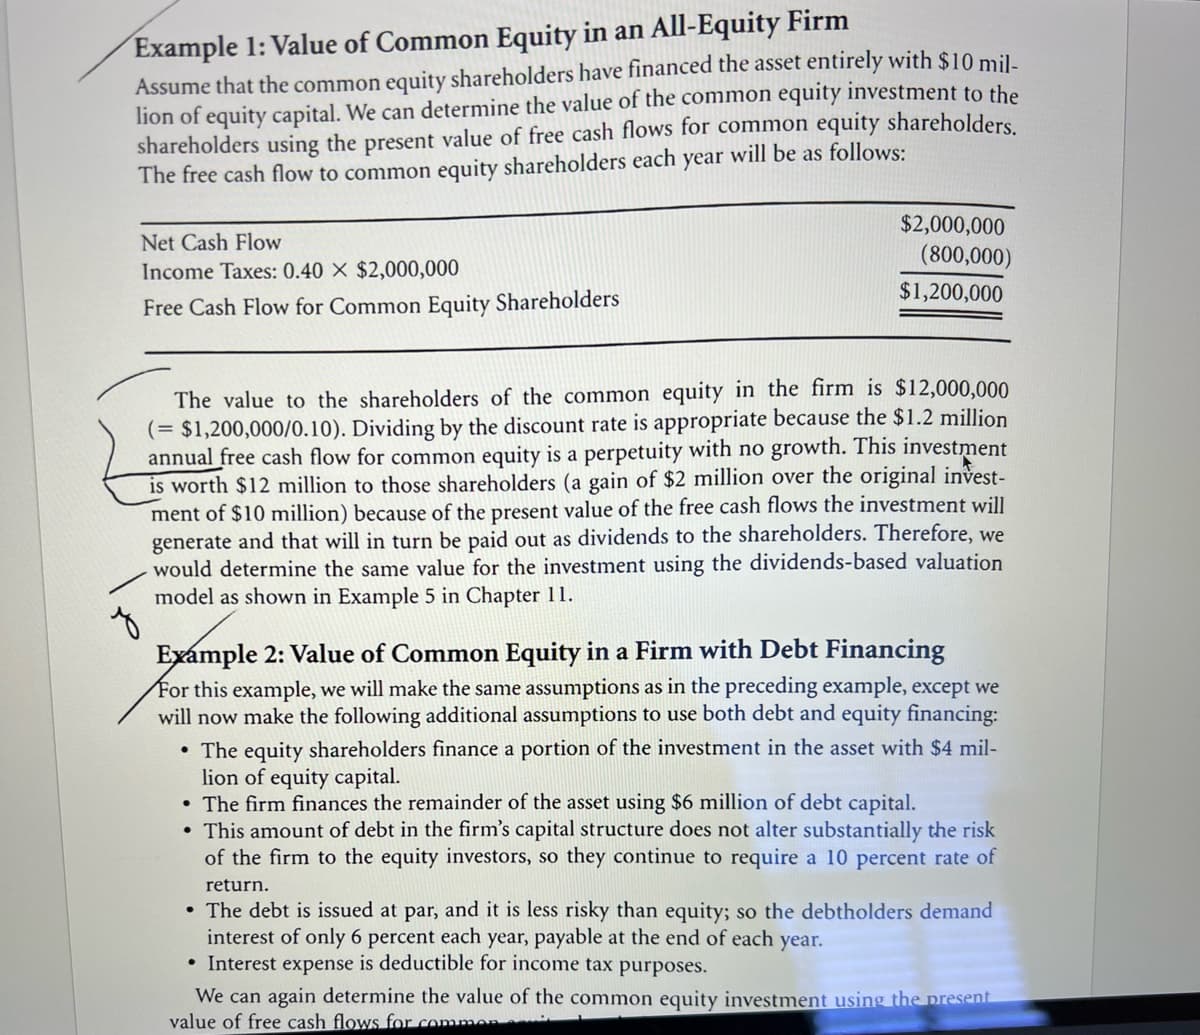 Example 1: Value of Common Equity in an All-Equity Firm
Assume that the common equity shareholders have financed the asset entirely with $10 mil-
lion of equity capital. We can determine the value of the common equity investment to the
shareholders using the present value of free cash flows for common equity shareholders.
The free cash flow to common equity shareholders each year will be as follows:
Net Cash Flow
Income Taxes: 0.40 X $2,000,000
Free Cash Flow for Common Equity Shareholders
$2,000,000
(800,000)
$1,200,000
The value to the shareholders of the common equity in the firm
(= $1,200,000/0.10). Dividing by the discount rate is appropriate because the $1.2 million
annual free cash flow for common equity is a perpetuity with no growth. This investment
is worth $12 million to those shareholders (a gain of $2 million over the original invest-
ment of $10 million) because of the present value of the free cash flows the investment will
generate and that will in turn be paid out as dividends to the shareholders. Therefore, we
would determine the same value for the investment using the dividends-based valuation
model as shown in Example 5 in Chapter 11.
$12,000,000
z
Example 2: Value of Common Equity in a Firm with Debt Financing
For this example, we will make the same assumptions as in the preceding example, except we
will now make the following additional assumptions to use both debt and equity financing:
• The equity shareholders finance a portion of the investment in the asset with $4 mil-
lion of equity capital.
• The firm finances the remainder of the asset using $6 million of debt capital.
• This amount of debt in the firm's capital structure does not alter substantially the risk
of the firm to the equity investors, so they continue to require a 10 percent rate of
return.
• The debt is issued at par, and it is less risky than equity; so the debtholders demand
interest of only 6 percent each year, payable at the end of each year.
• Interest expense is deductible for income tax purposes.
We can again determine the value of the common equity investment using the present
value of free cash flows for commen